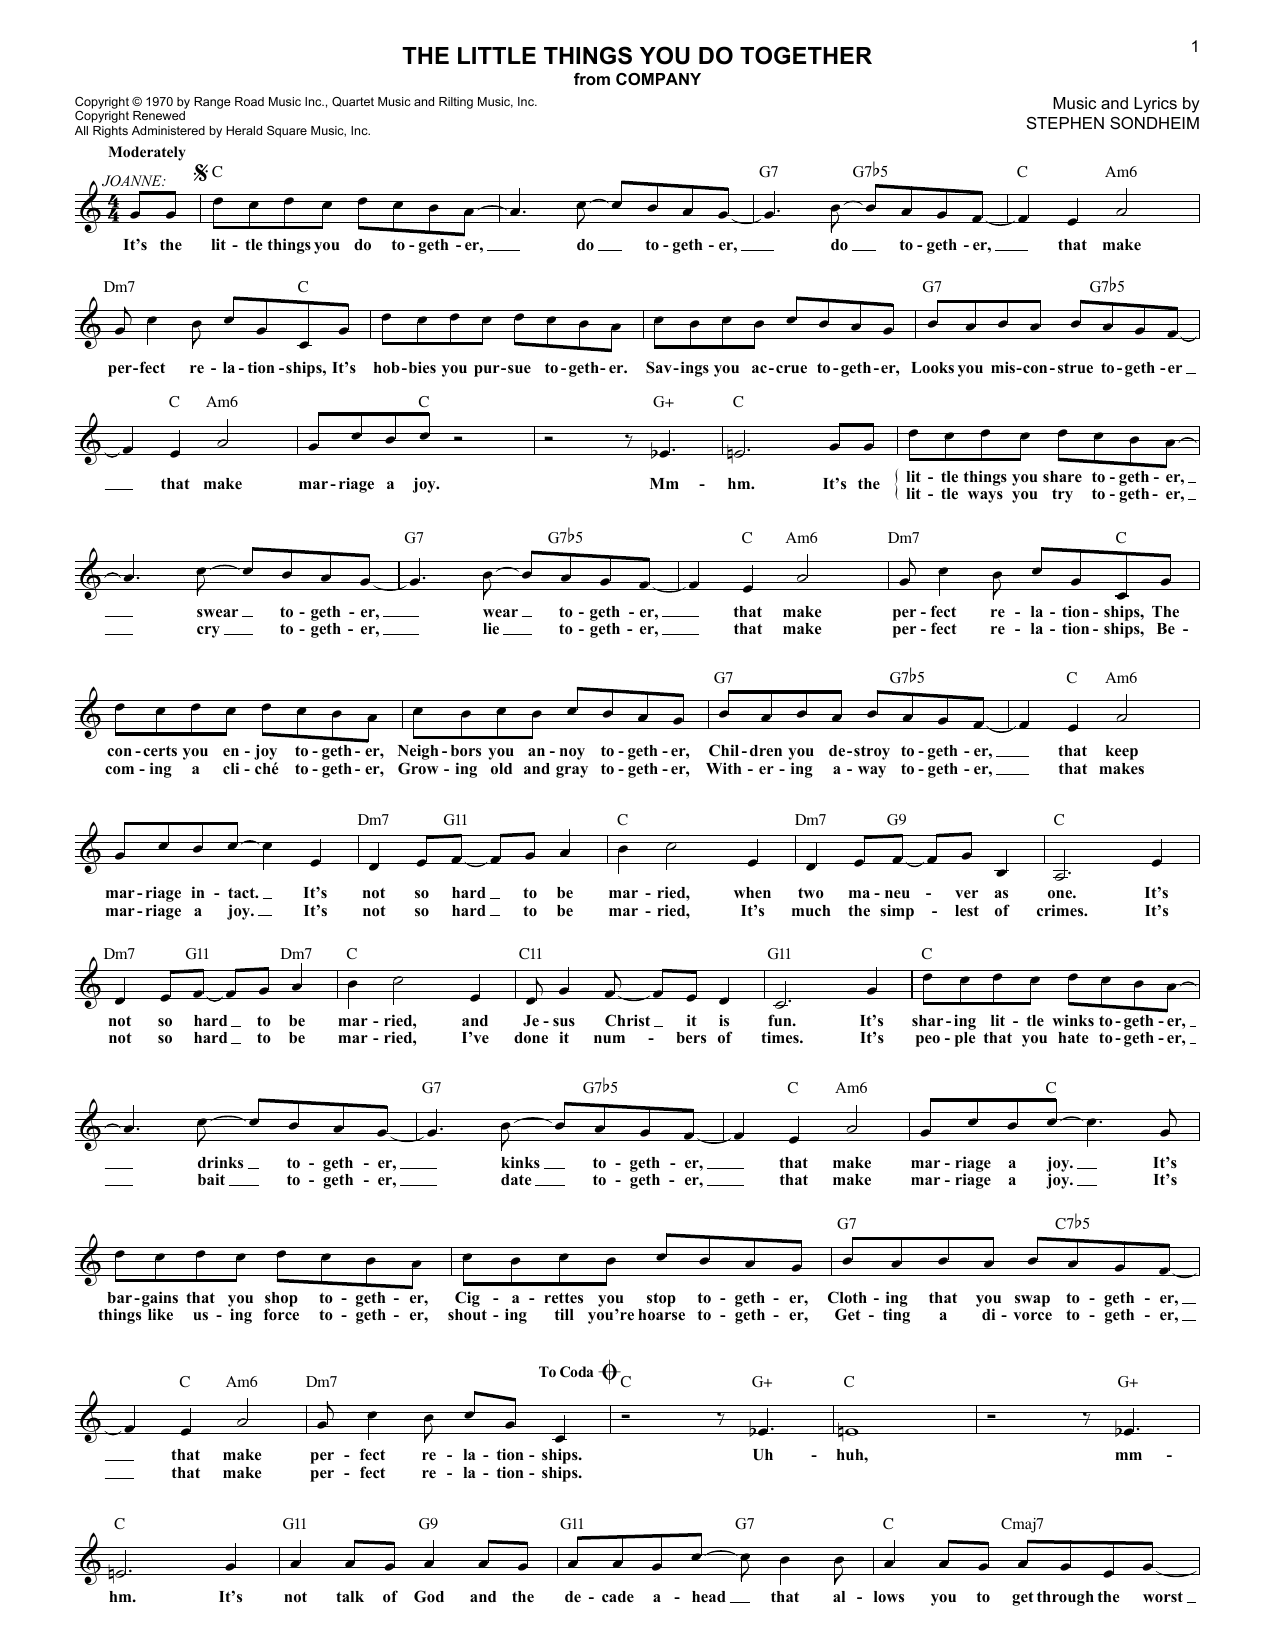 Download Stephen Sondheim The Little Things You Do Together Sheet Music